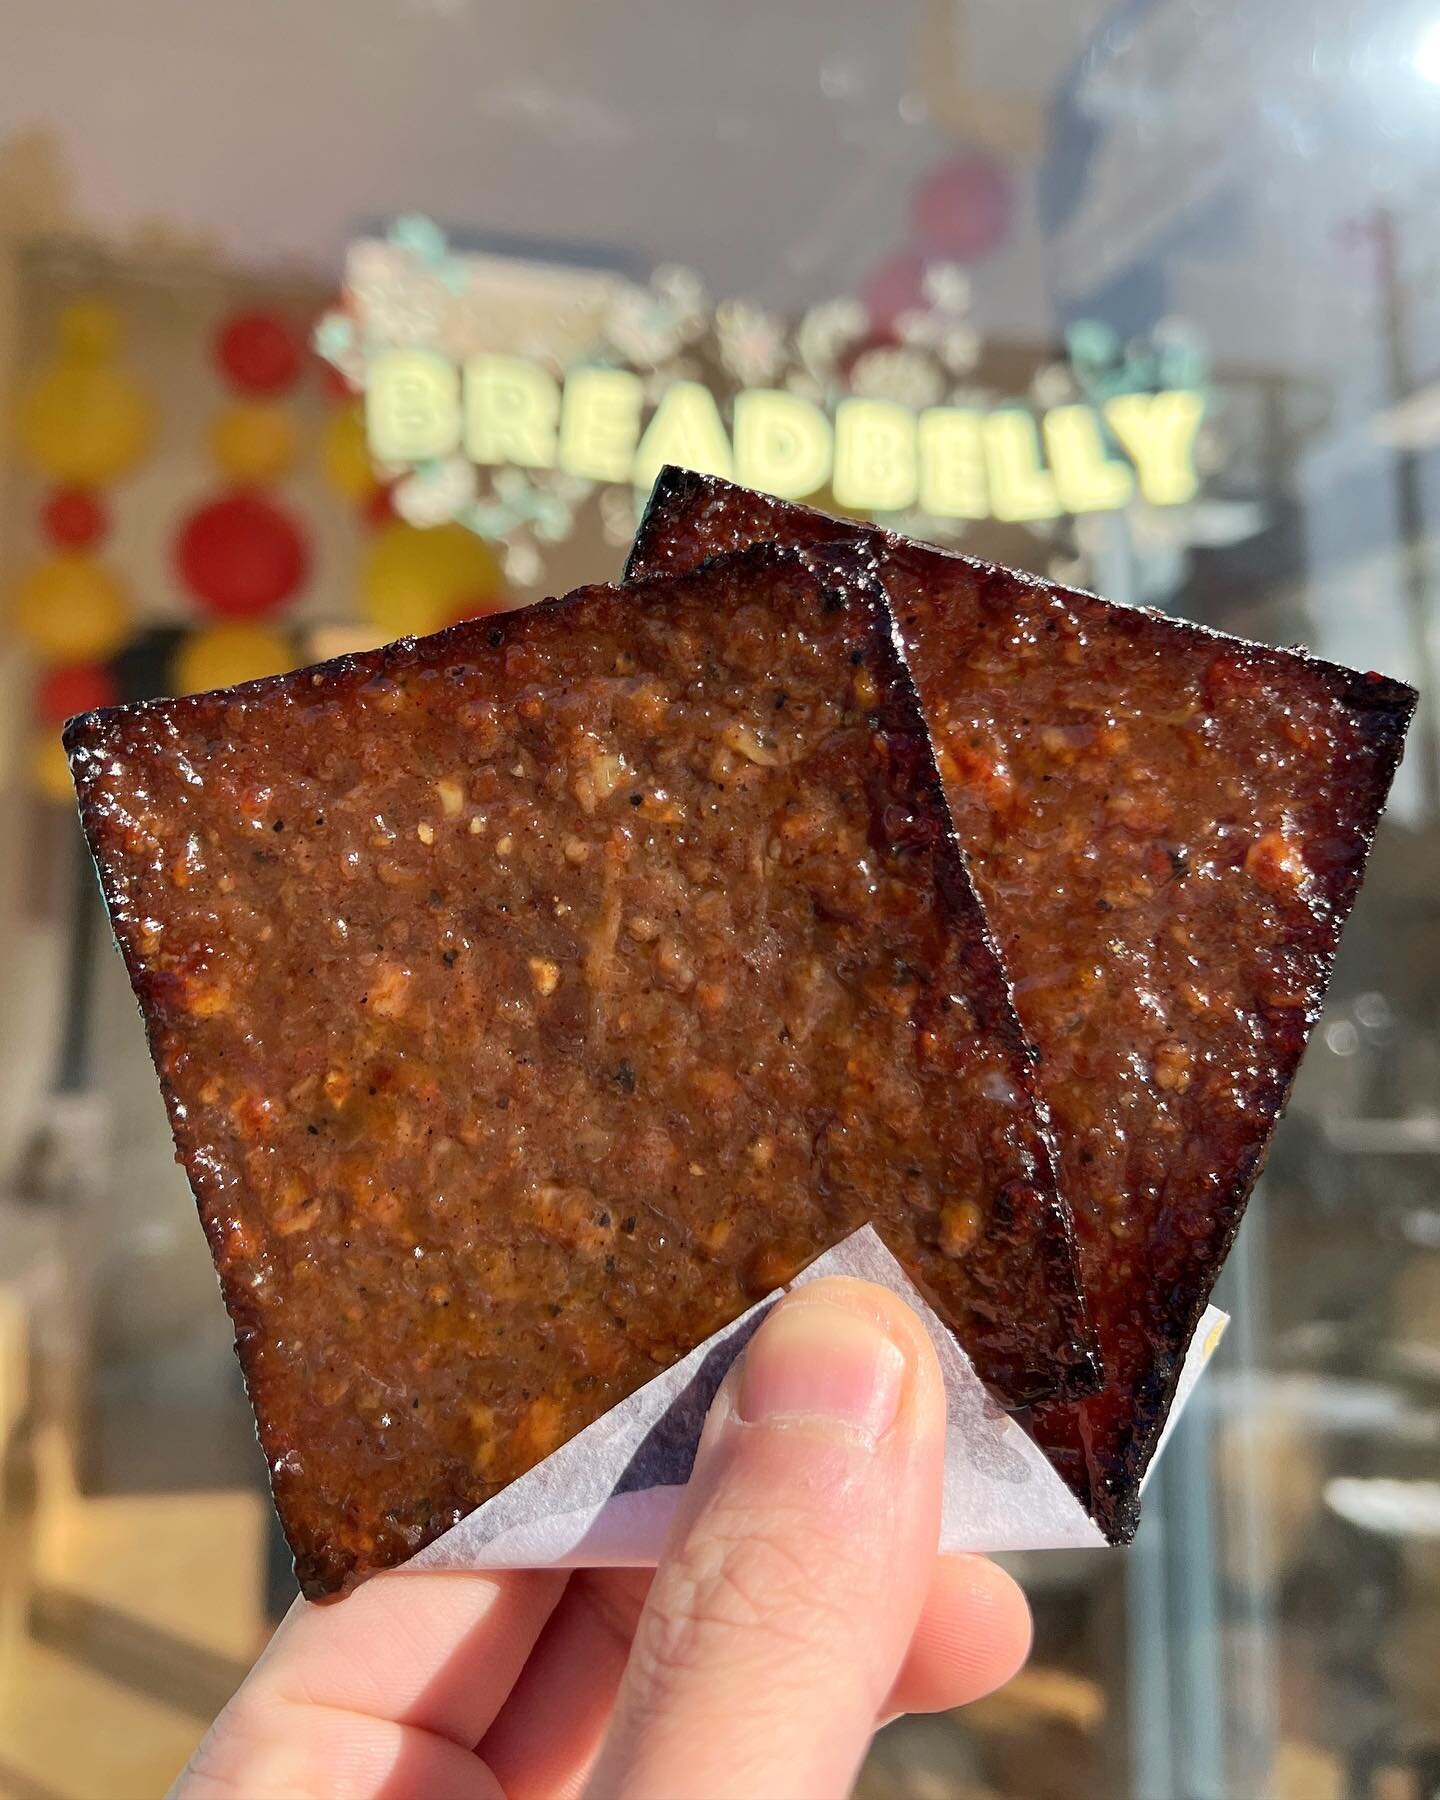 🧧 Bak Kwa! Lunar New Year treats are here!! Fujian-style pork jerky the Breadbelly way. Flavored with Chinese five-spice and glazed with pineapple and honey 🍯! A sweet, savory bite to welcome the New Year! 🐲

We&rsquo;ll have bak kwa throughout Lu